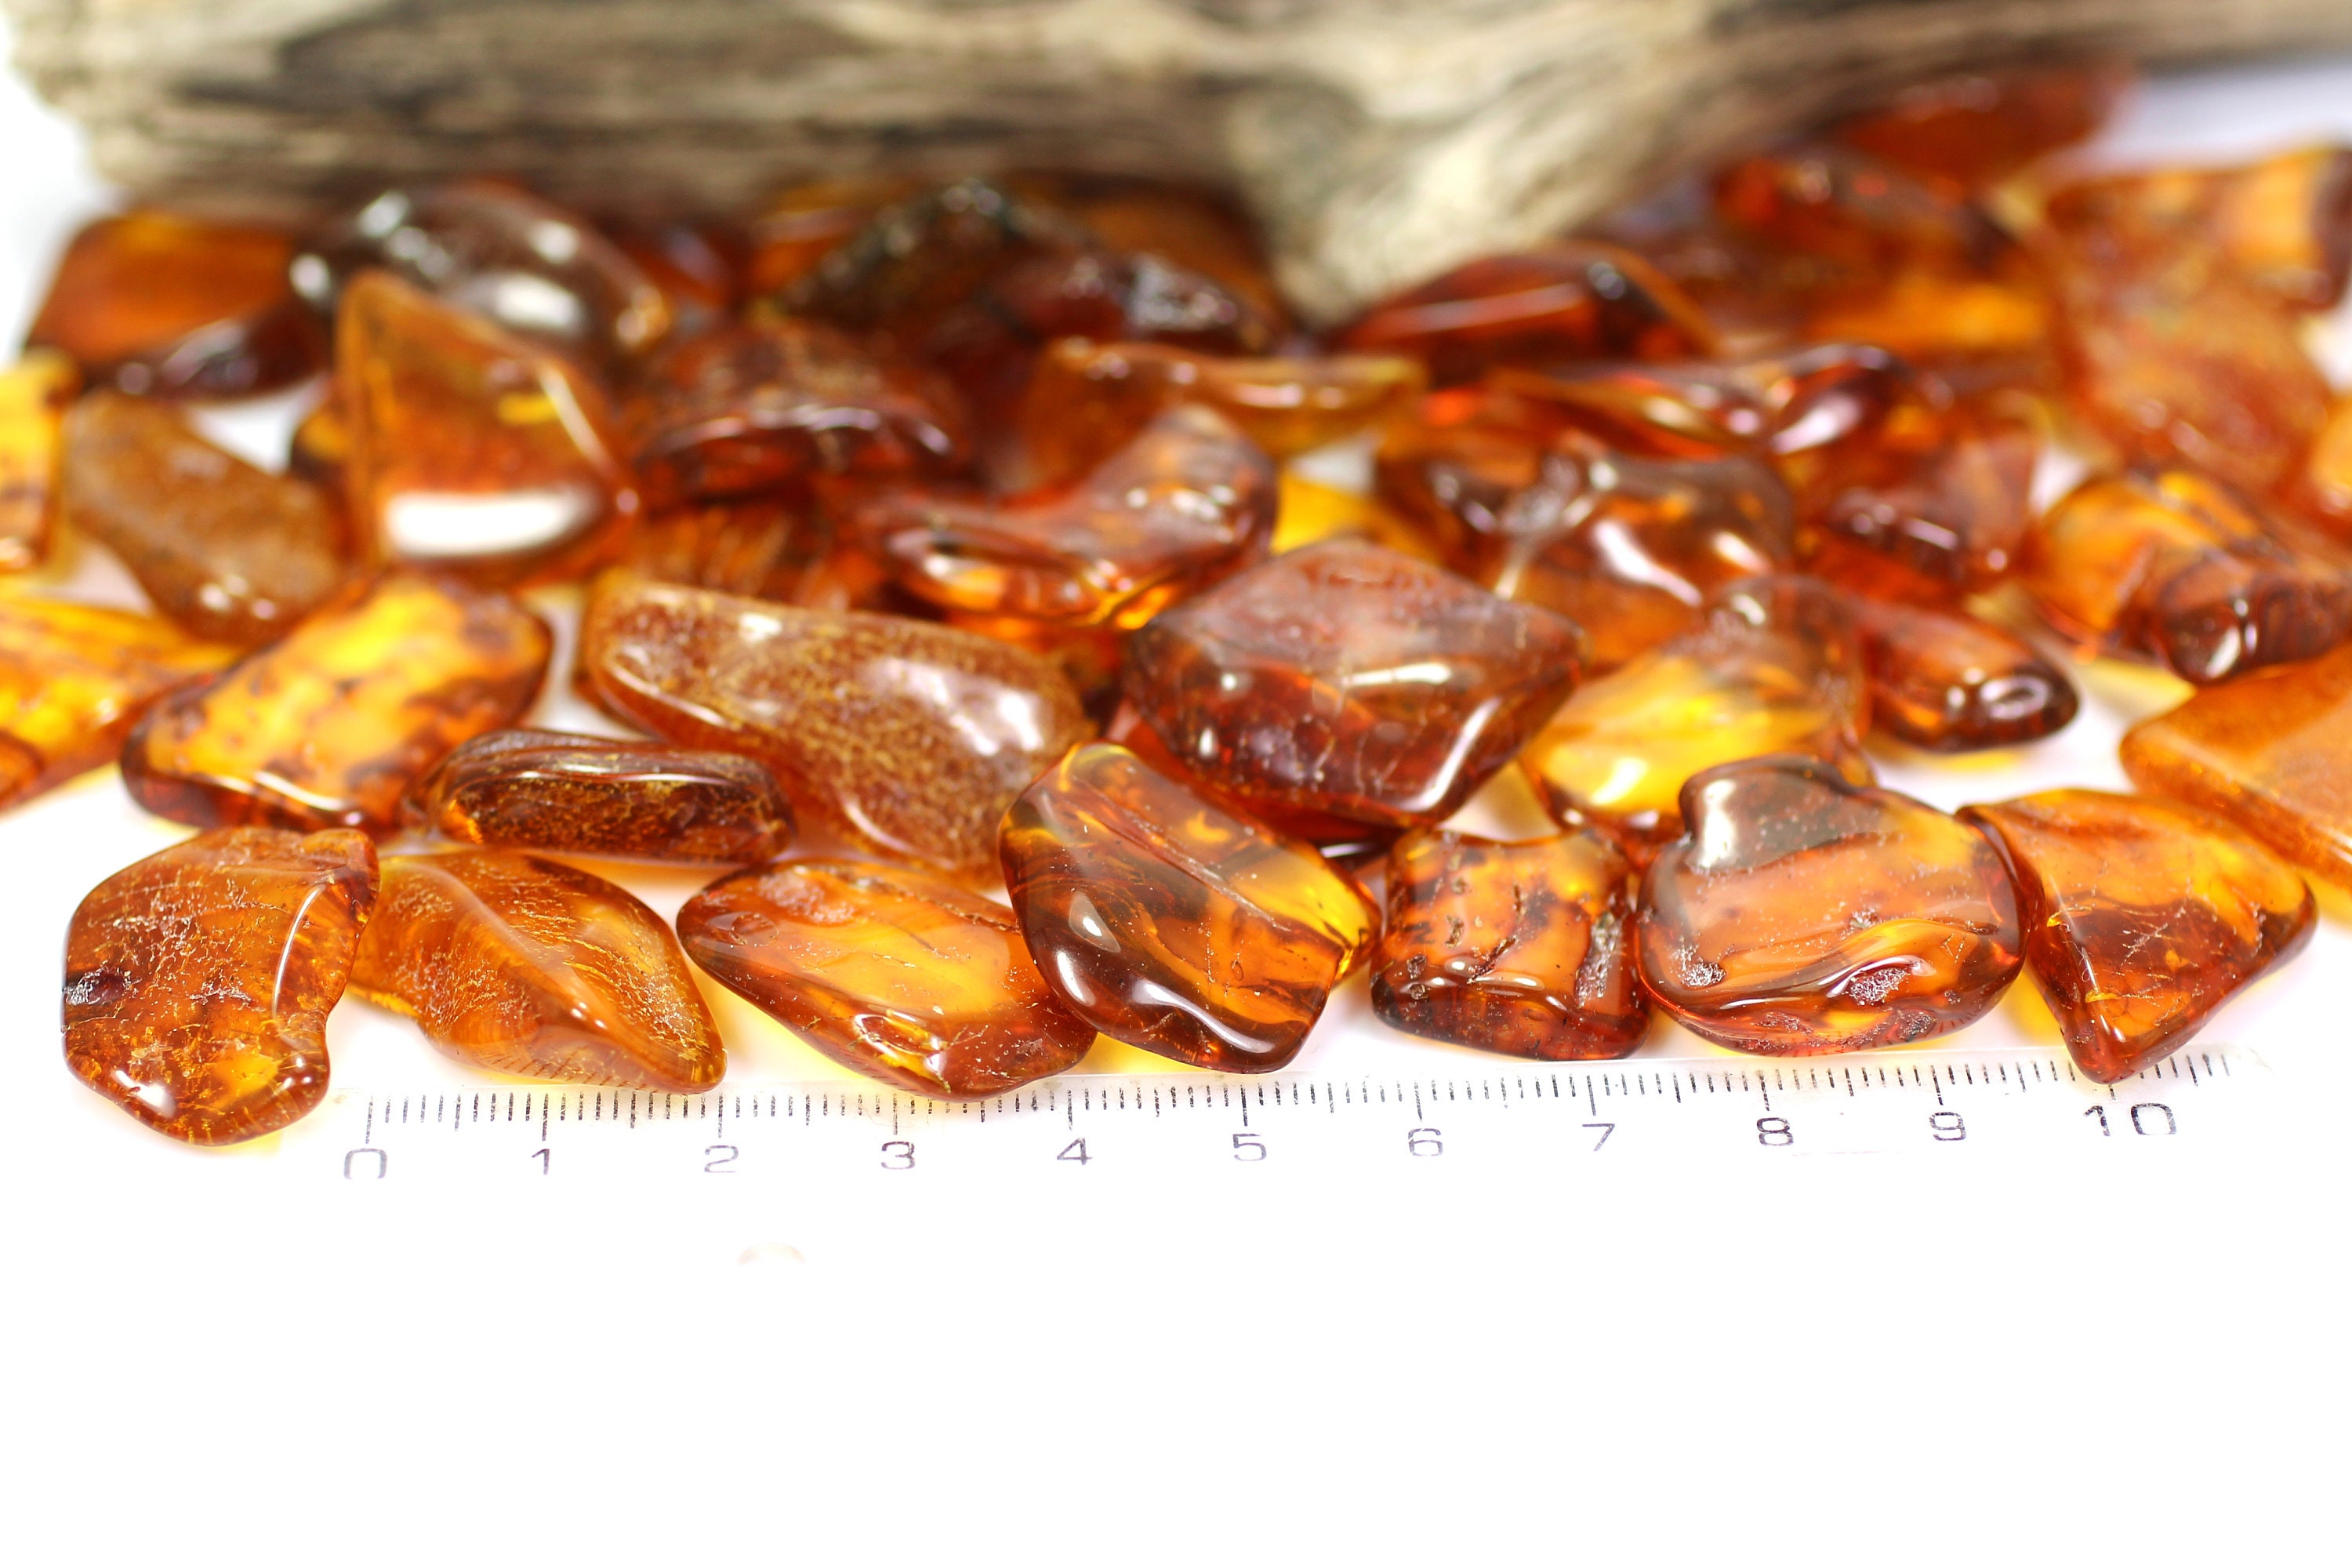 crafters tumbled stones 2 pcs lot polished 7,9 grams and  8,9 grams Genuine natural Baltic Amber Stones